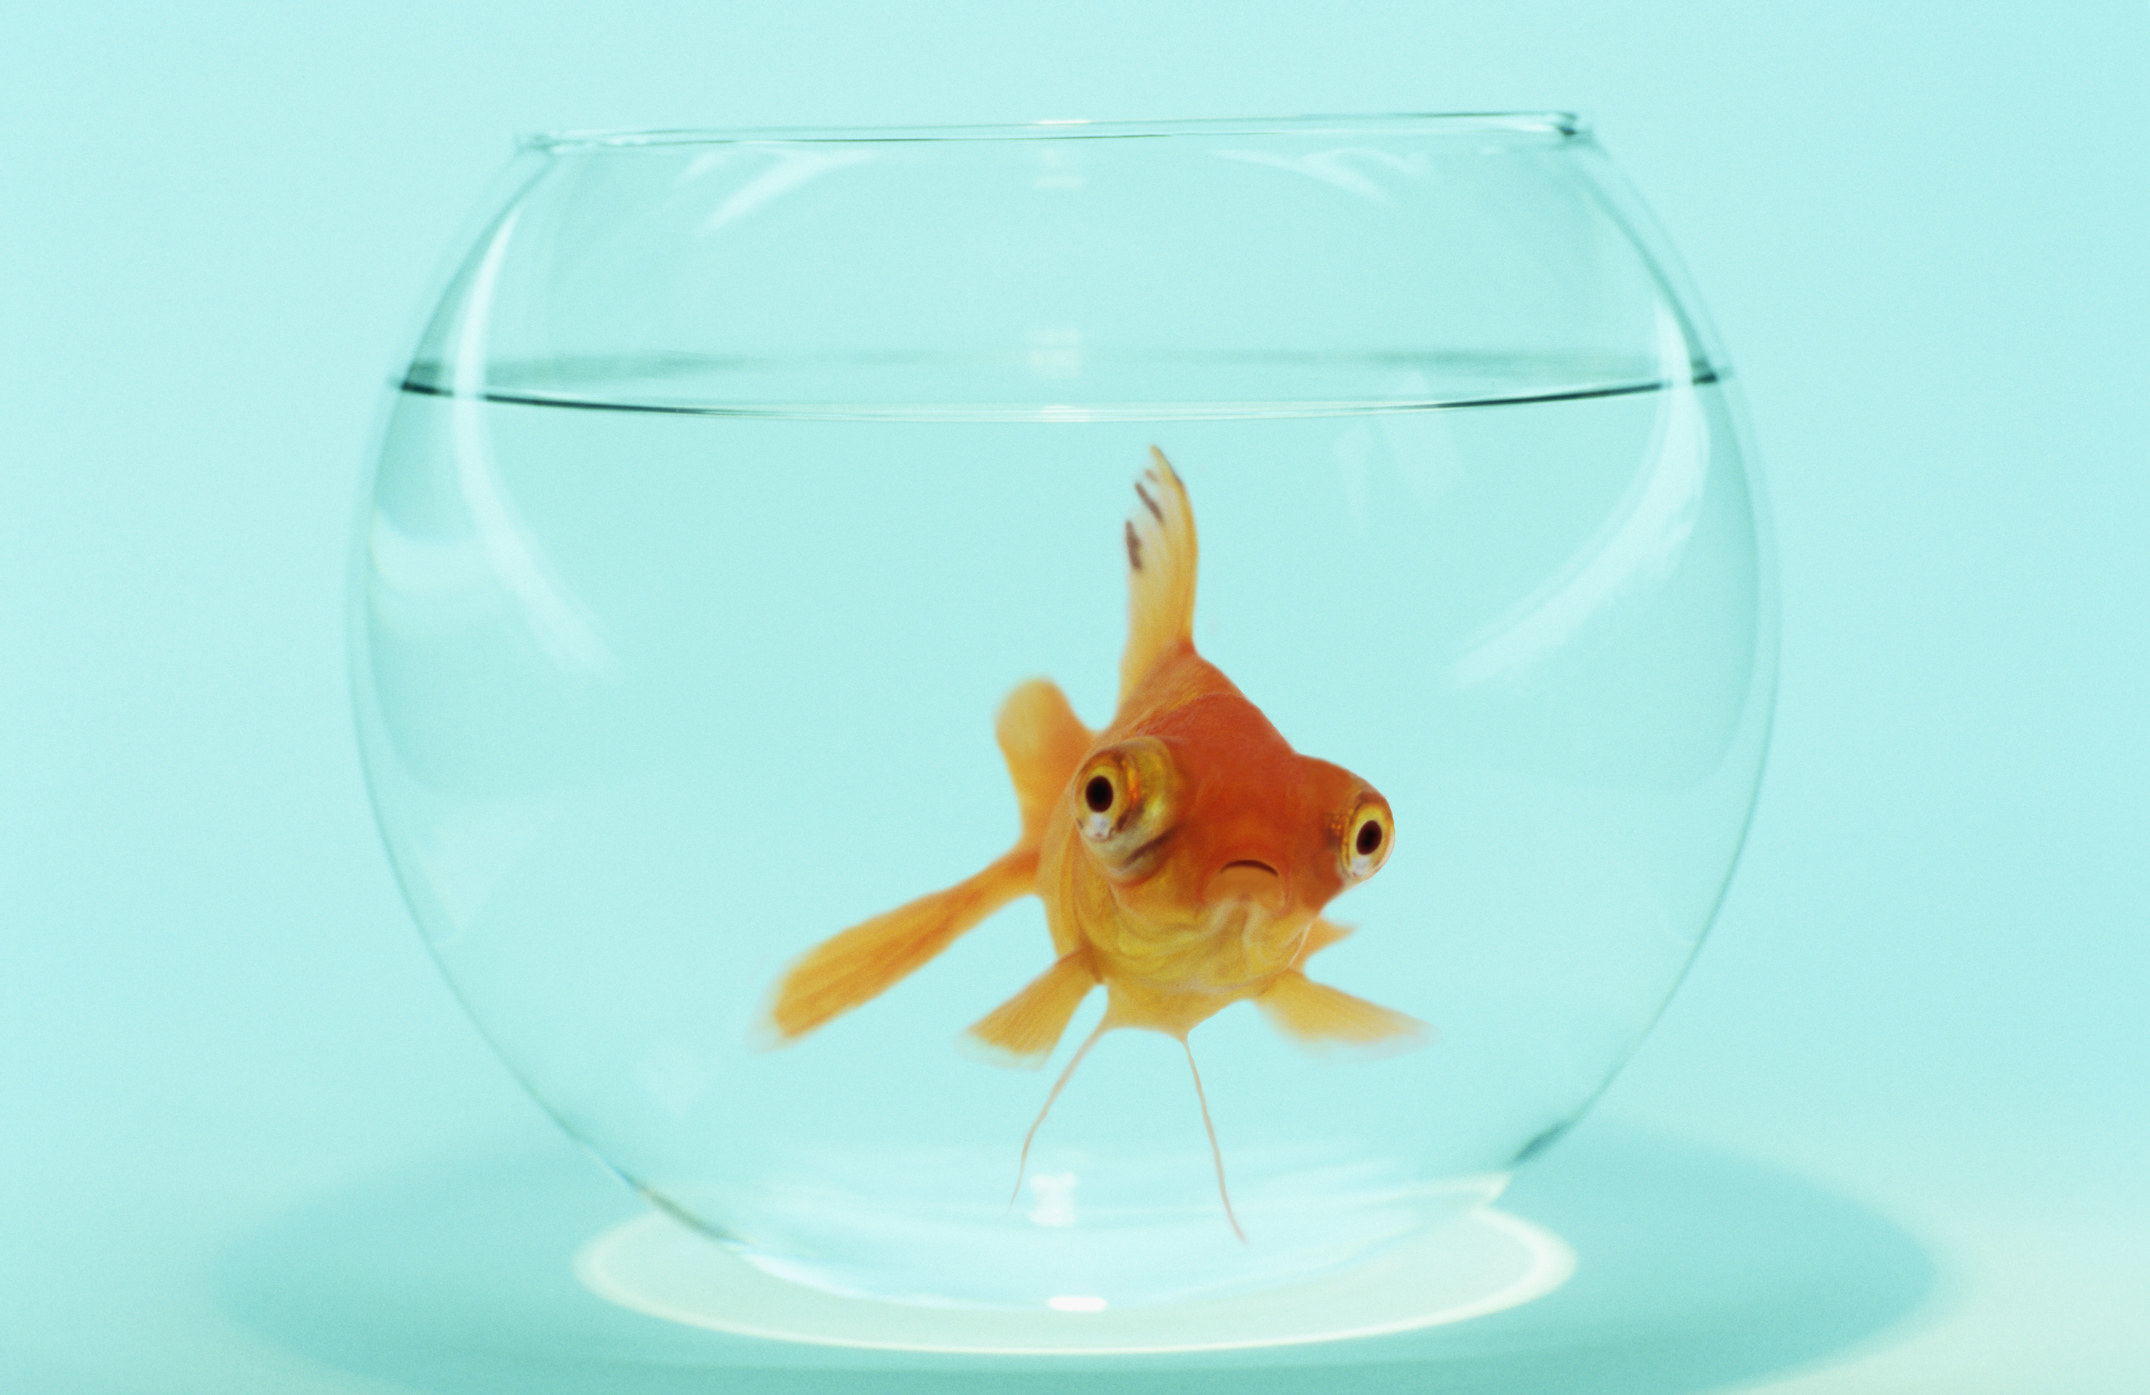 A goldfish in a fish bowl looking straight ahead